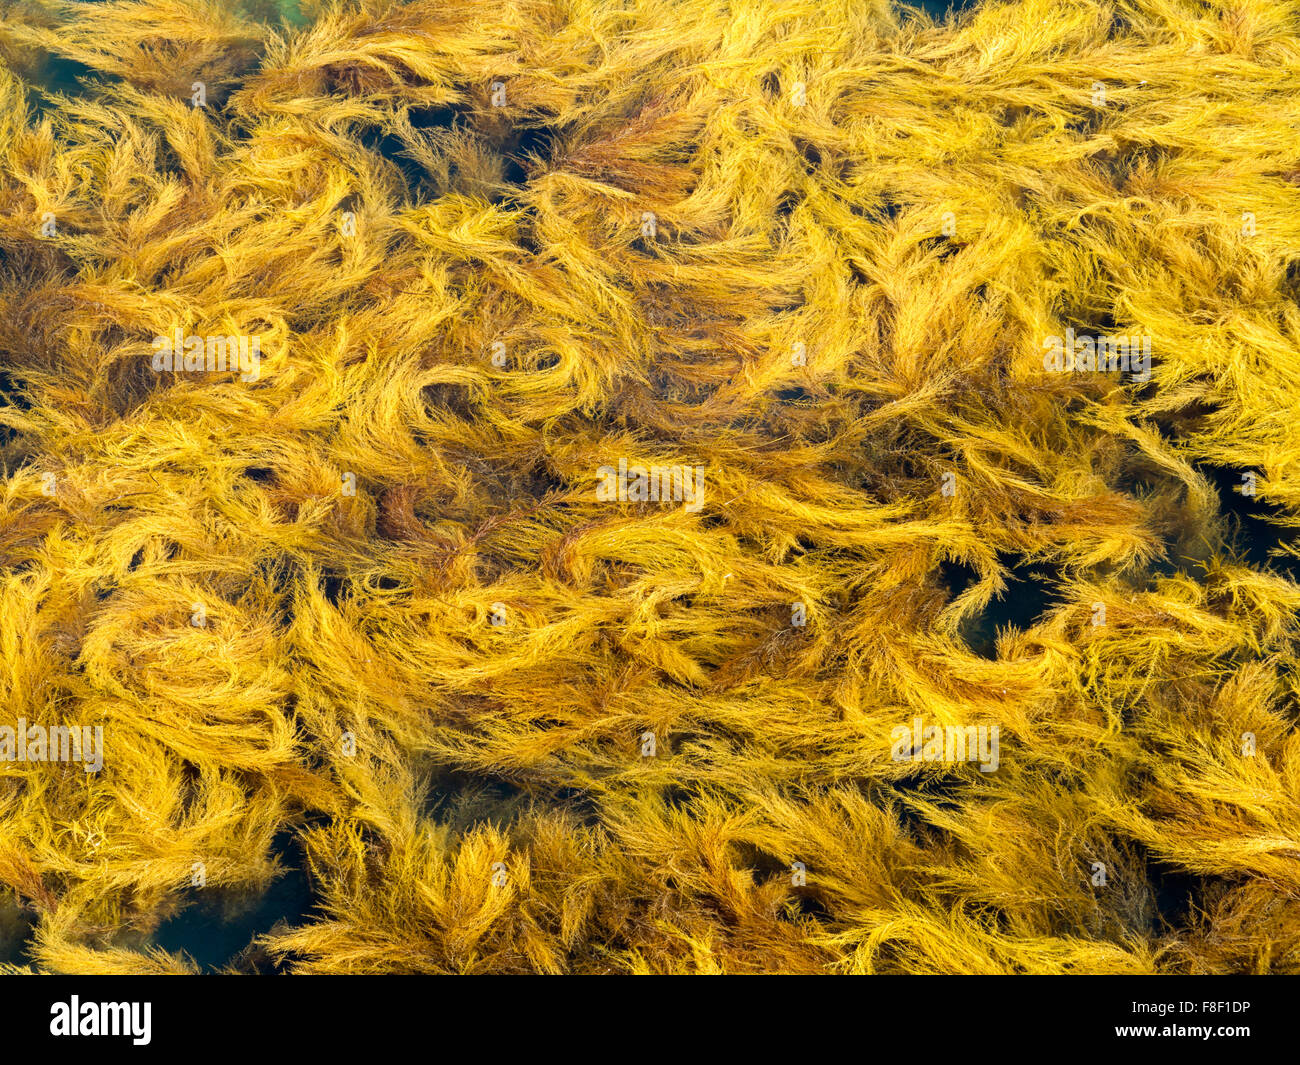 Yellow swirling seaweed photographed from above at Bembridge on the Isle of Wight England UK Stock Photo